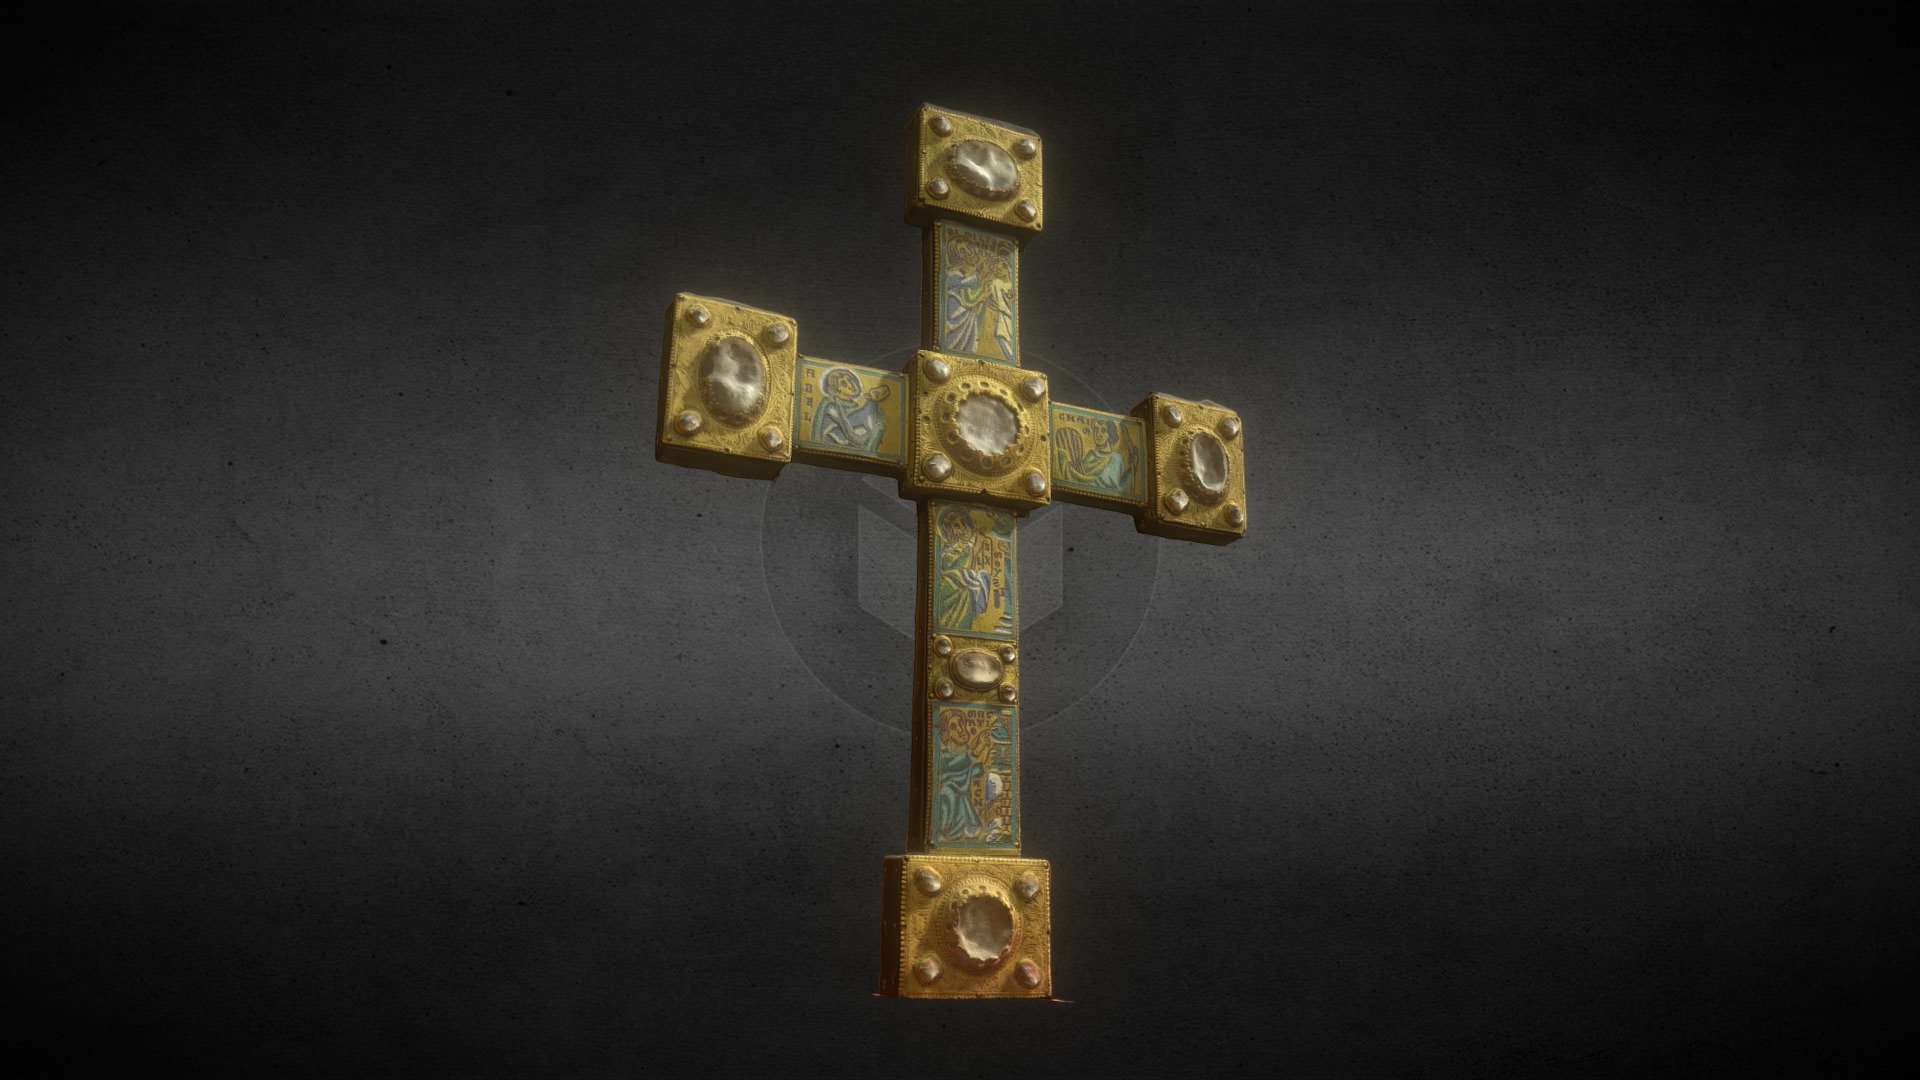 Typological cross, Mosan workshop, around 1150-1175, Soul of wood, champleved enamels, silver and copper engraved and gilded, plates of silver, rock crystal cabochons. Musée du Cinquantaire (Brussels, Belgium). Made with ReMake and ReCap Pro from AutoDesk.

This cross, remarkably preserved, is part of an important series so-called typological crosses. It is adorned with champleve emulsion prefiguring the sacrifice of Christ on the Cross: the offering of Cain and Abel, Aaron inscribing on the front of the Israelites the tau sign (formal prefiguration of the cross), the brazen serpent, the inscription of the sign tau at the gate of houses. The typological symbolism consists of going to search in the Old Testament of prophetic events announcing major episodes
Gospels. This theological process was a source of inspiration constant for Mosan artists.

For more updates, please consider to follow me on Twitter at @GeoffreyMarchal 3d model